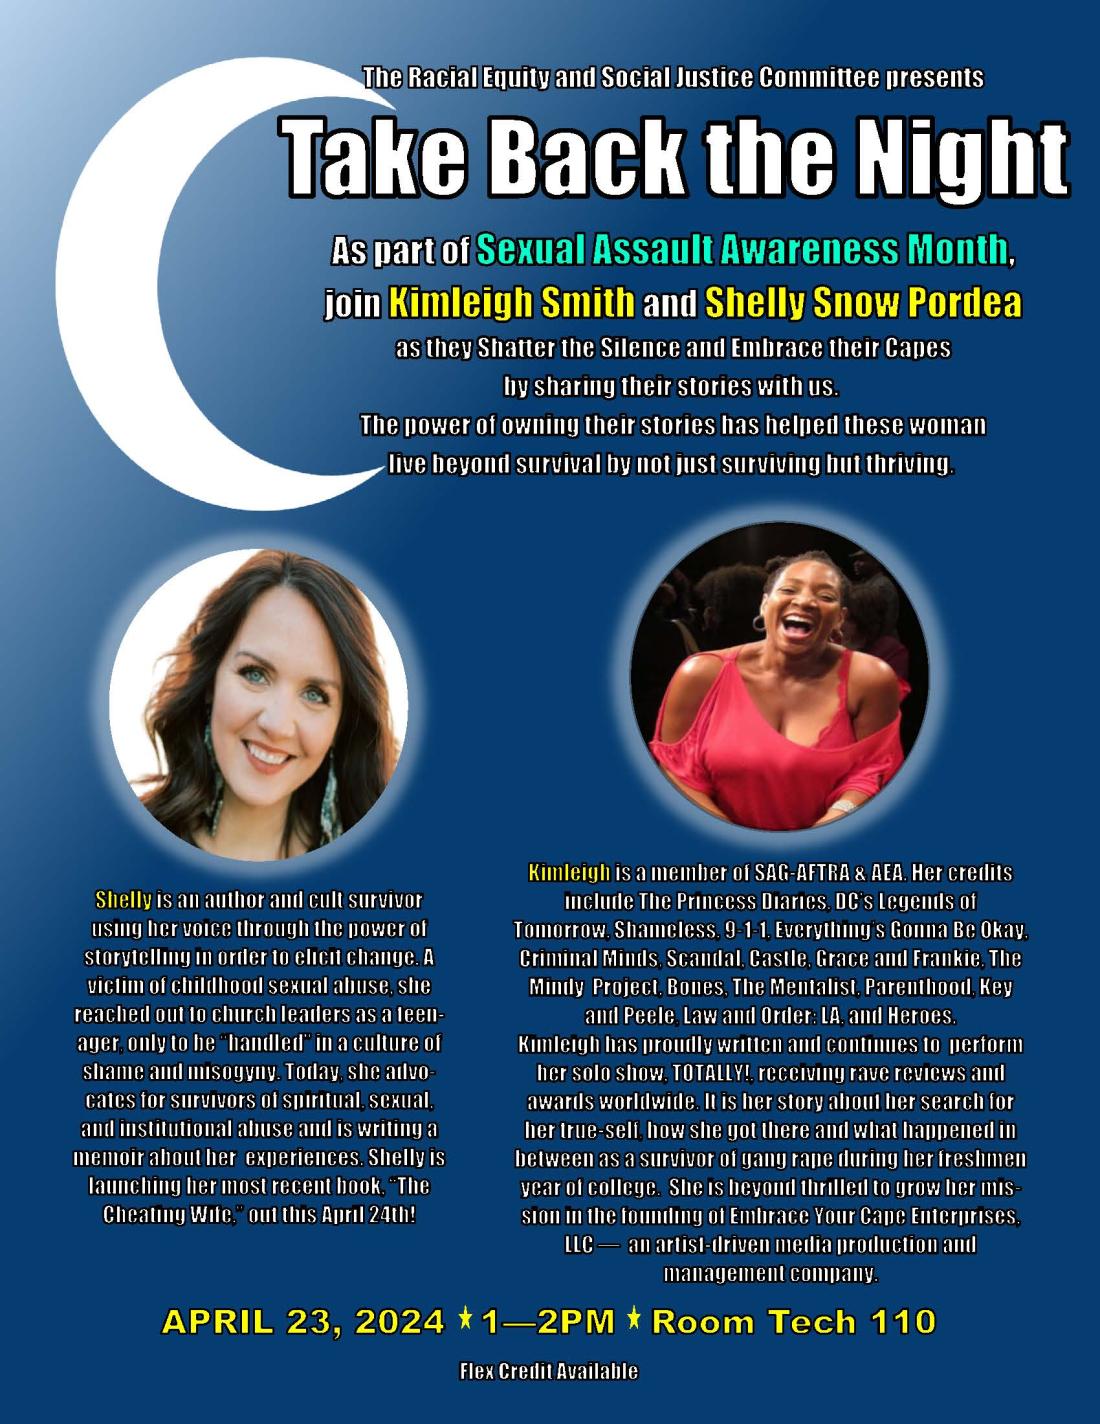 Date/time/location formation about the Take Back the Night Event including backgrounds on the guest speakers.